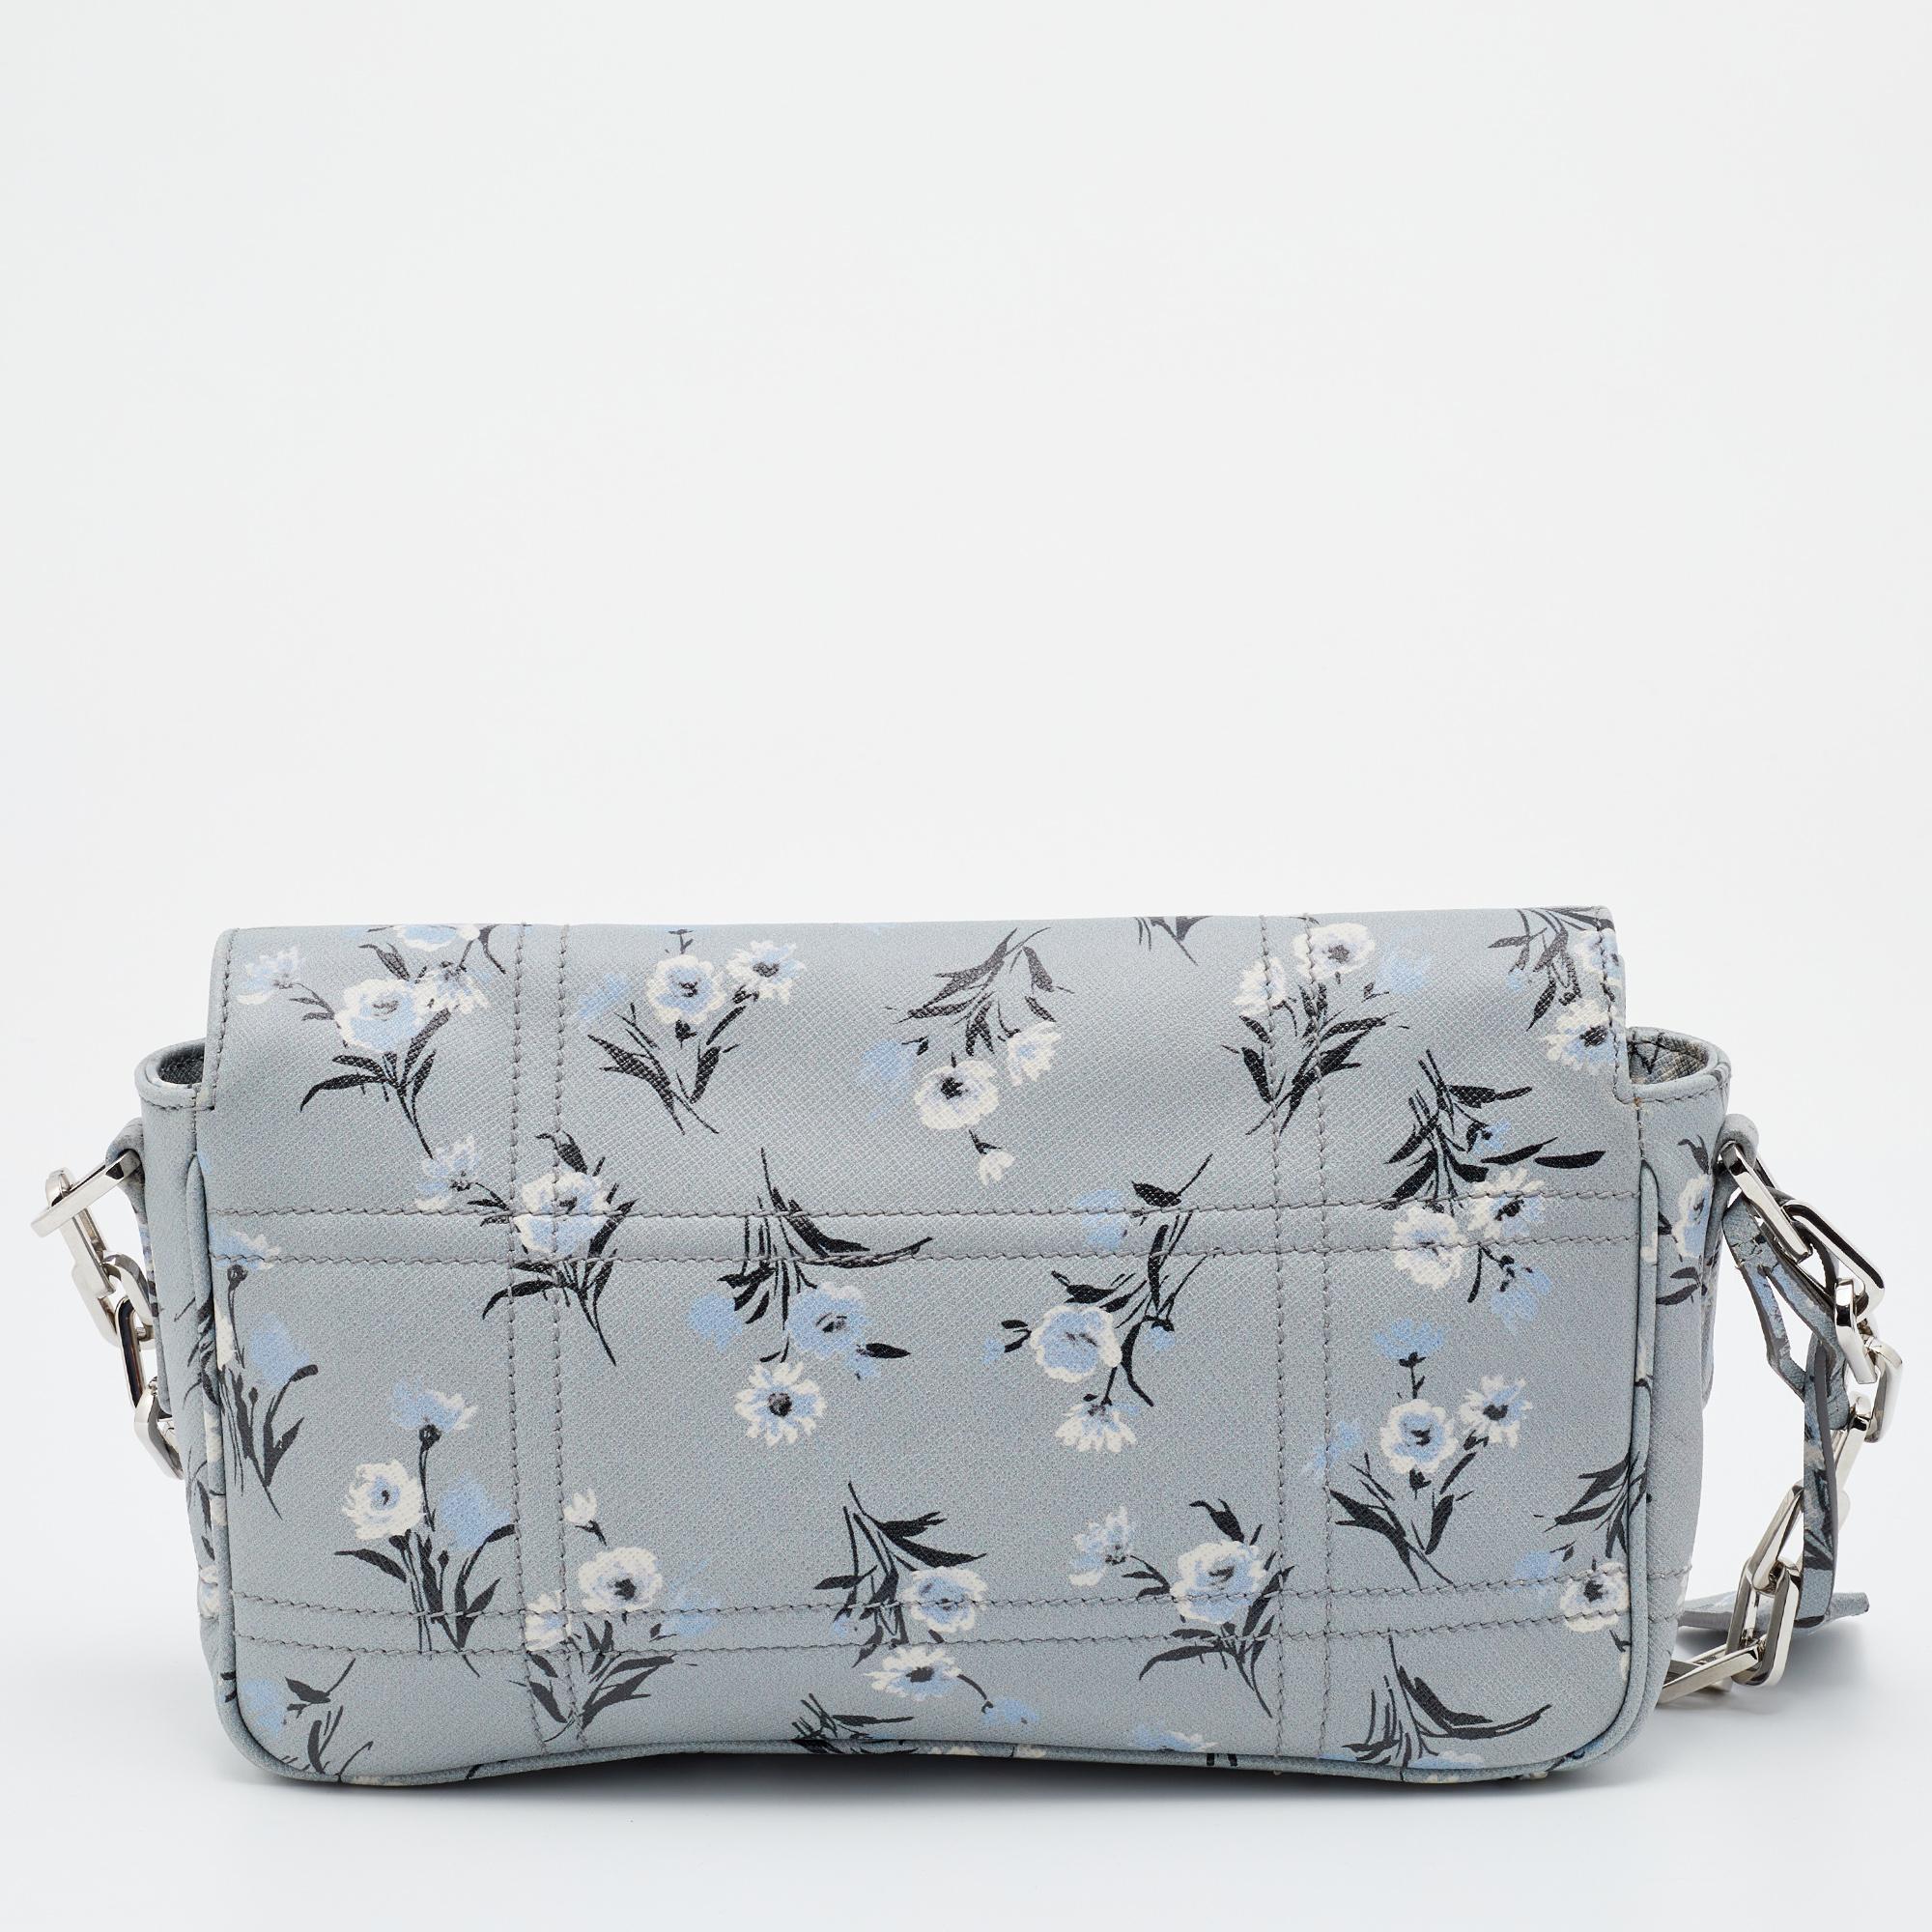 A beautiful designer piece is this shoulder bag to carry your essentials this season. Designed by Prada, the multicolored bag is made from Saffiano leather with silver-tone hardware. It features a spacious interior and lovely floral print all